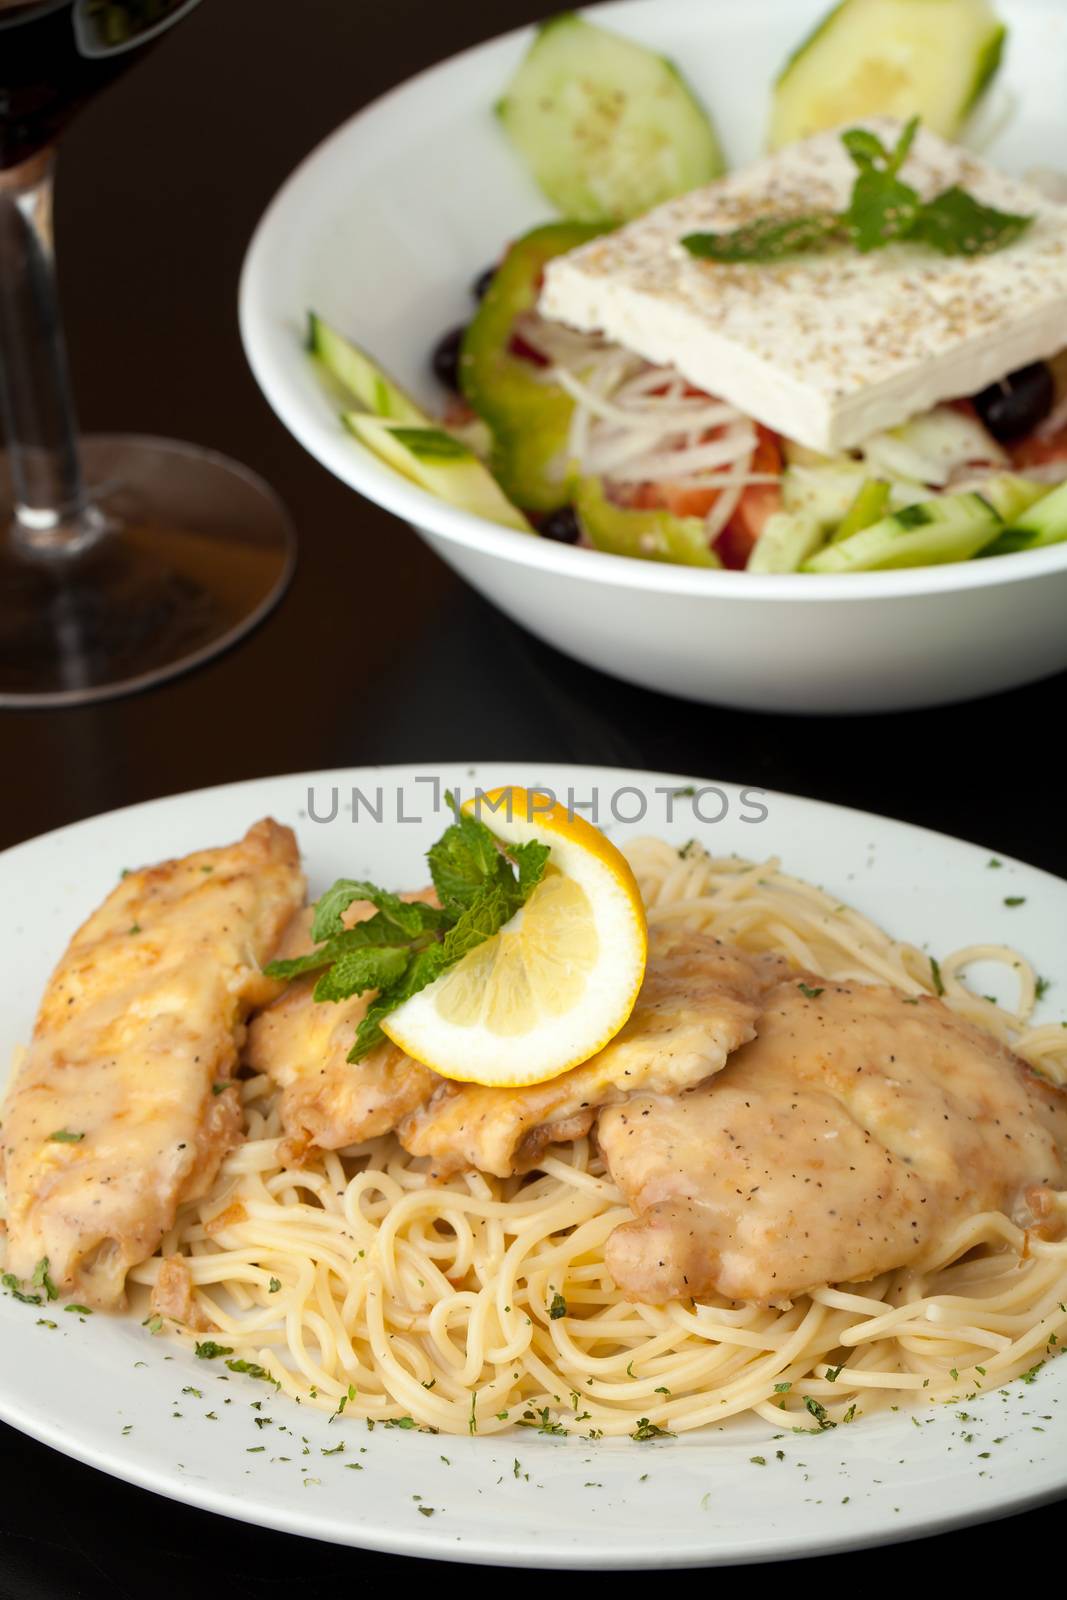 Chicken francaise or francese plated with pasta with salad in the background.